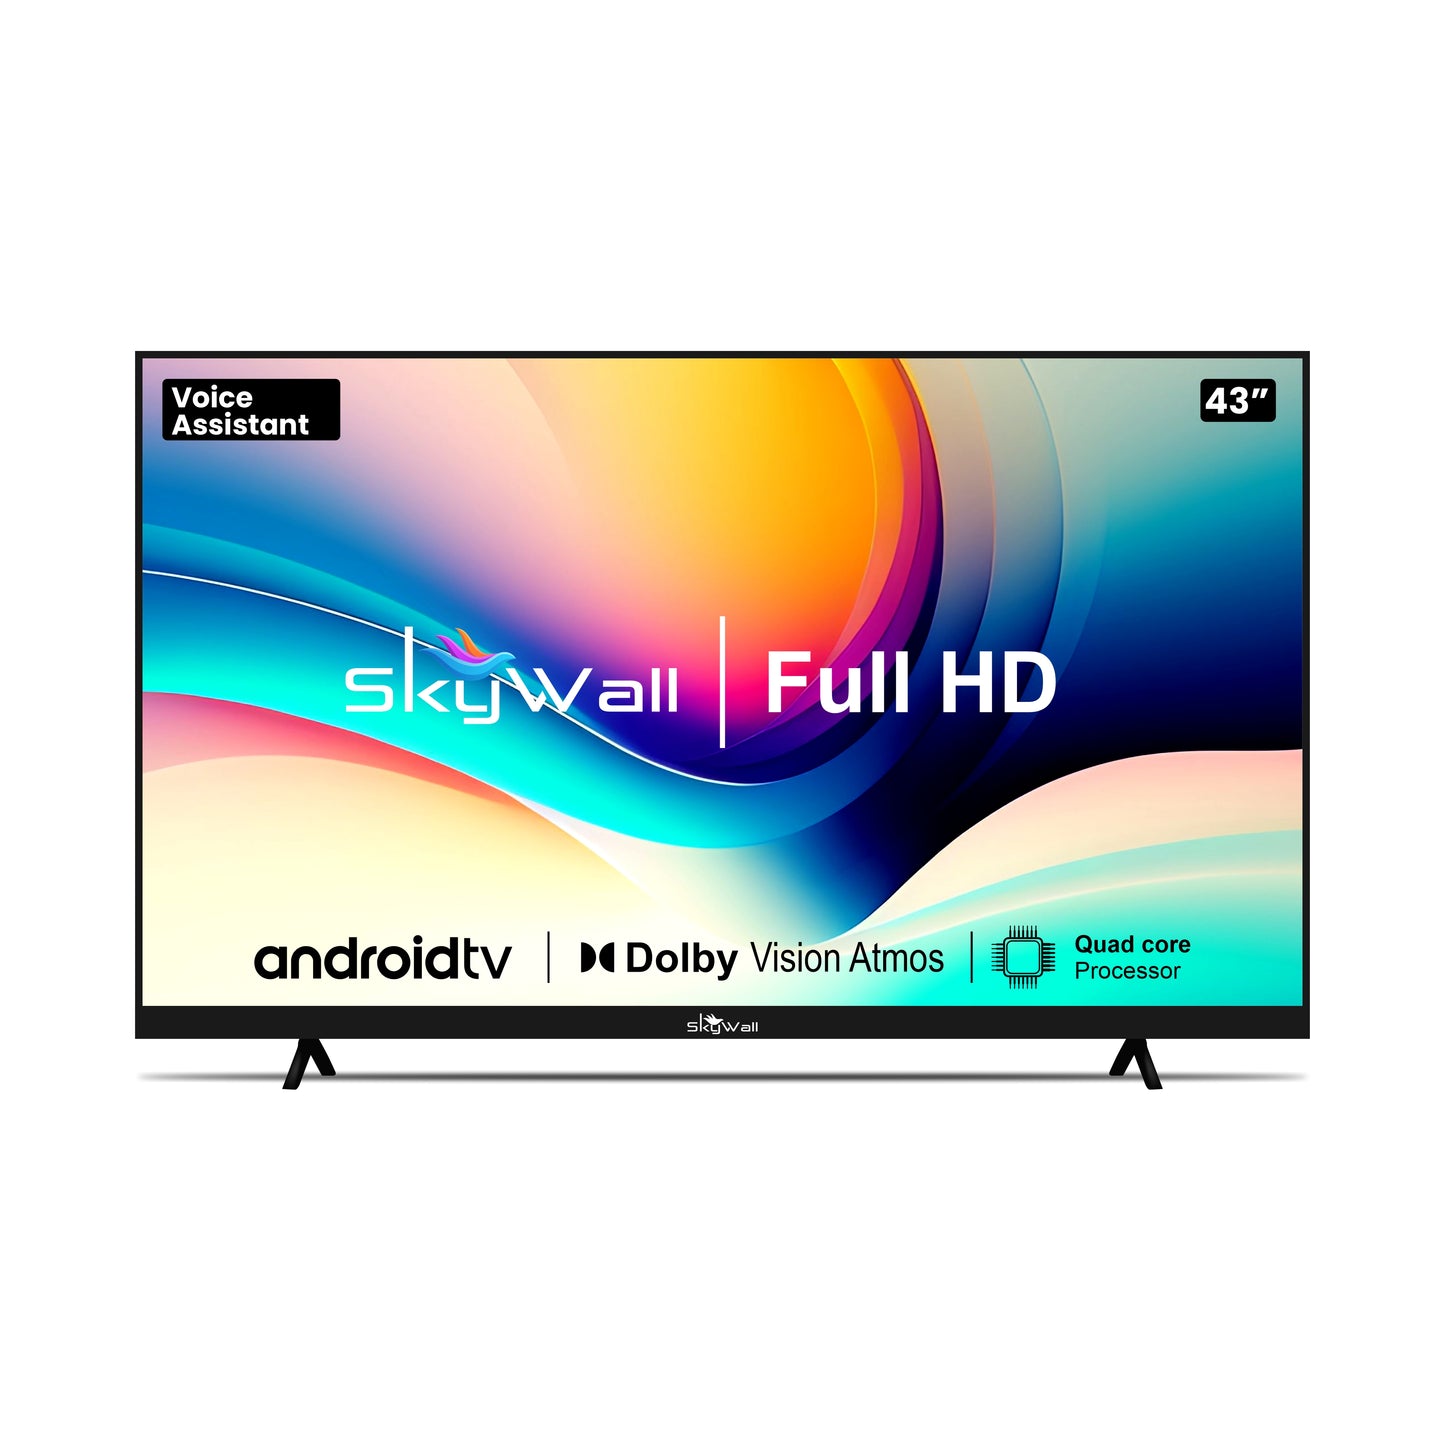 SkyWall™ TV Full HD TV SkyWall 108 cm (43 inches) Full HD Smart LED TV 43SW-Voice (Frameless Edition)  With Voice Assistant